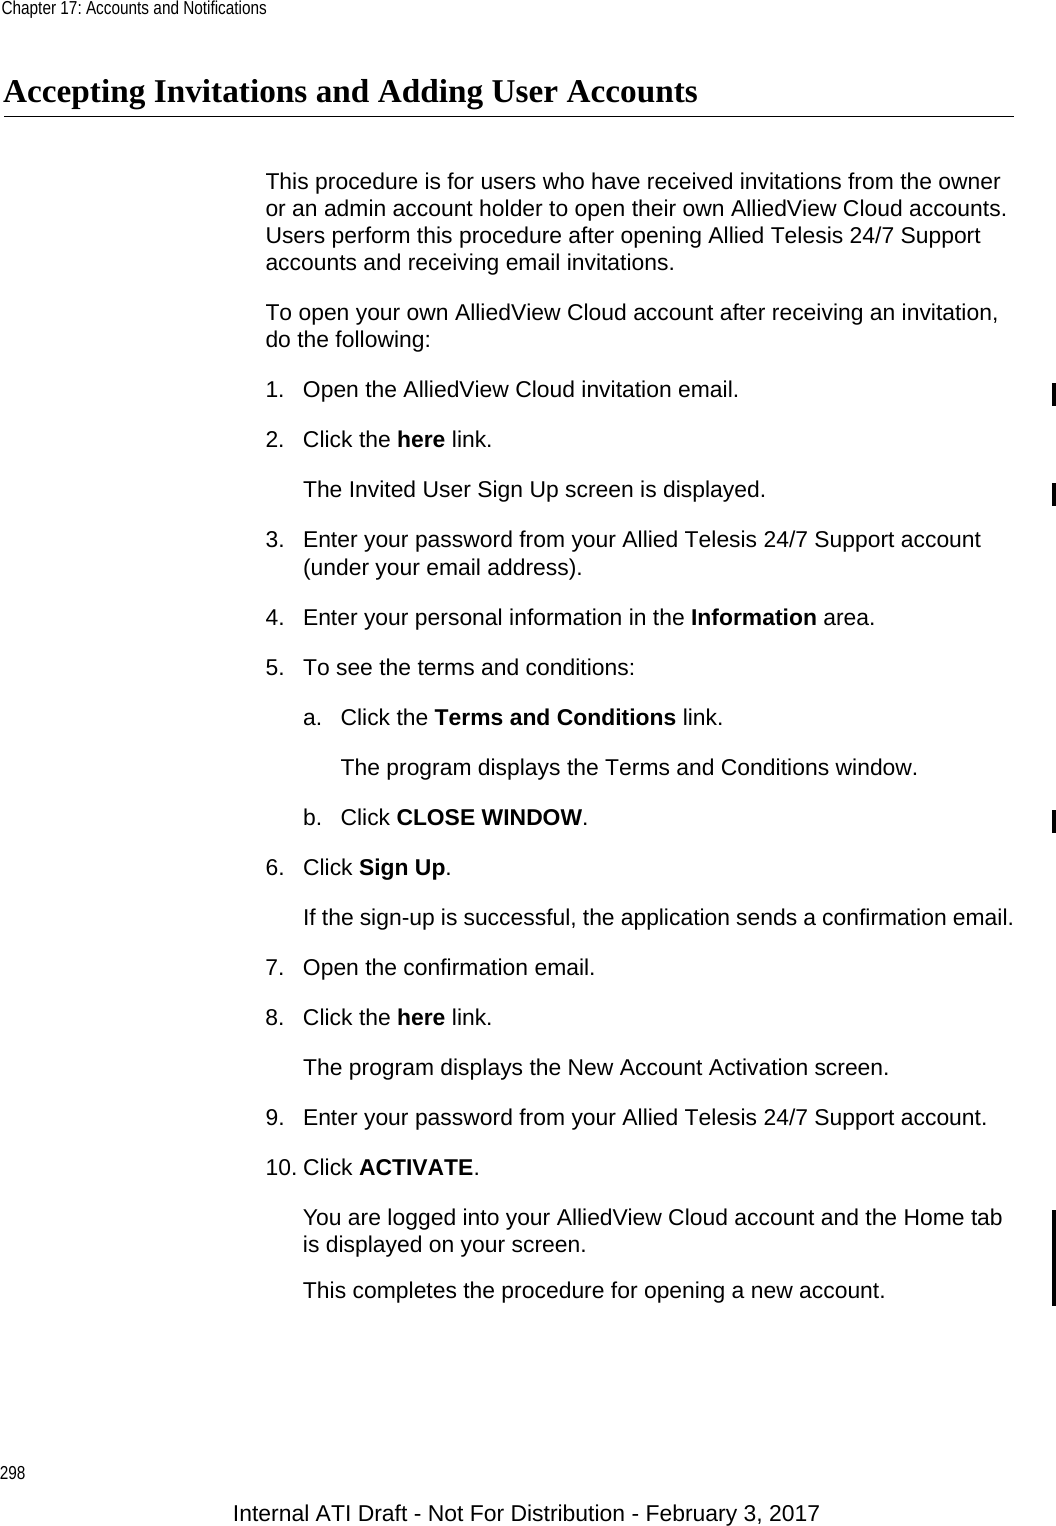 Chapter 17: Accounts and Notifications298Accepting Invitations and Adding User AccountsThis procedure is for users who have received invitations from the owner or an admin account holder to open their own AlliedView Cloud accounts. Users perform this procedure after opening Allied Telesis 24/7 Support accounts and receiving email invitations.To open your own AlliedView Cloud account after receiving an invitation, do the following:1. Open the AlliedView Cloud invitation email.2. Click the here link.The Invited User Sign Up screen is displayed.3. Enter your password from your Allied Telesis 24/7 Support account (under your email address).4. Enter your personal information in the Information area.5. To see the terms and conditions:a. Click the Terms and Conditions link.The program displays the Terms and Conditions window.b. Click CLOSE WINDOW.6. Click Sign Up.If the sign-up is successful, the application sends a confirmation email.7. Open the confirmation email.8. Click the here link.The program displays the New Account Activation screen.9. Enter your password from your Allied Telesis 24/7 Support account.10. Click ACTIVATE.You are logged into your AlliedView Cloud account and the Home tab is displayed on your screen.This completes the procedure for opening a new account.Internal ATI Draft - Not For Distribution - February 3, 2017